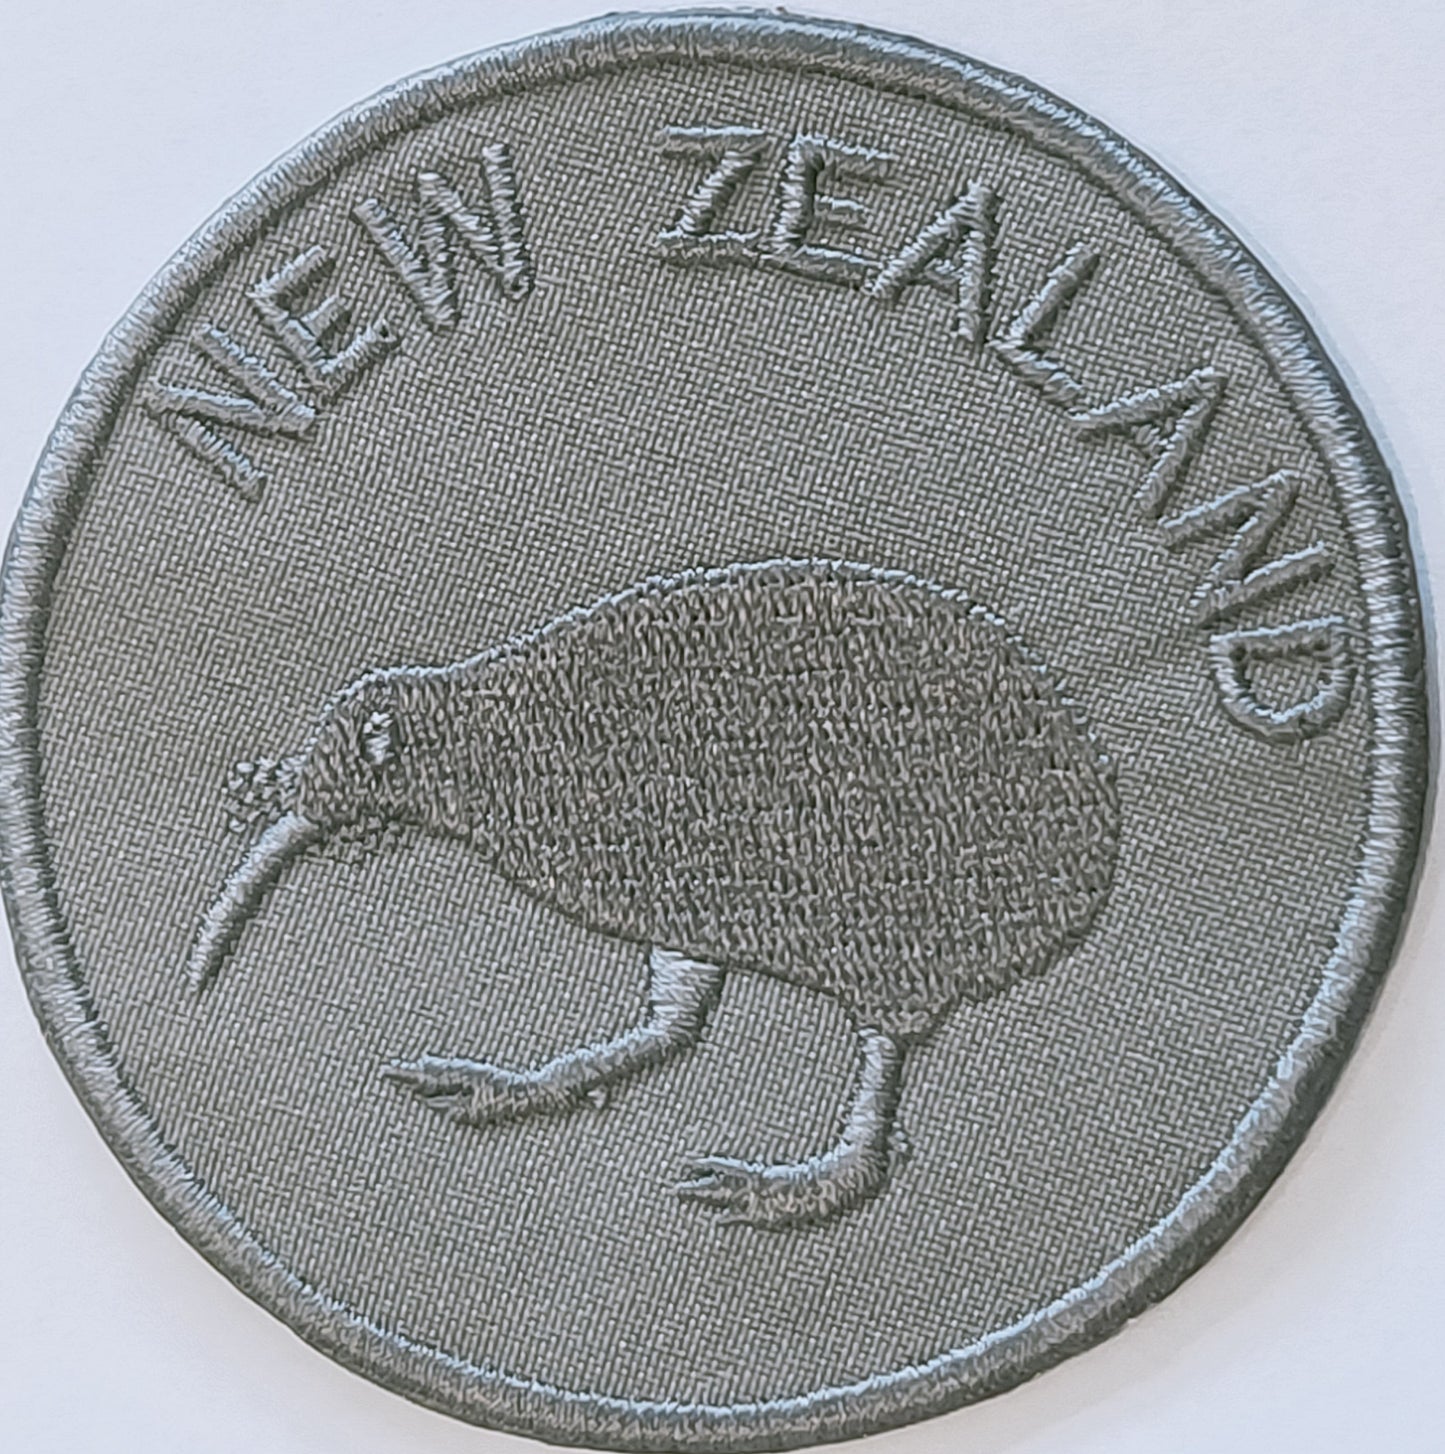 Kiwi Flag Patch with script - Round - Embroidered Multiple colours/sizes